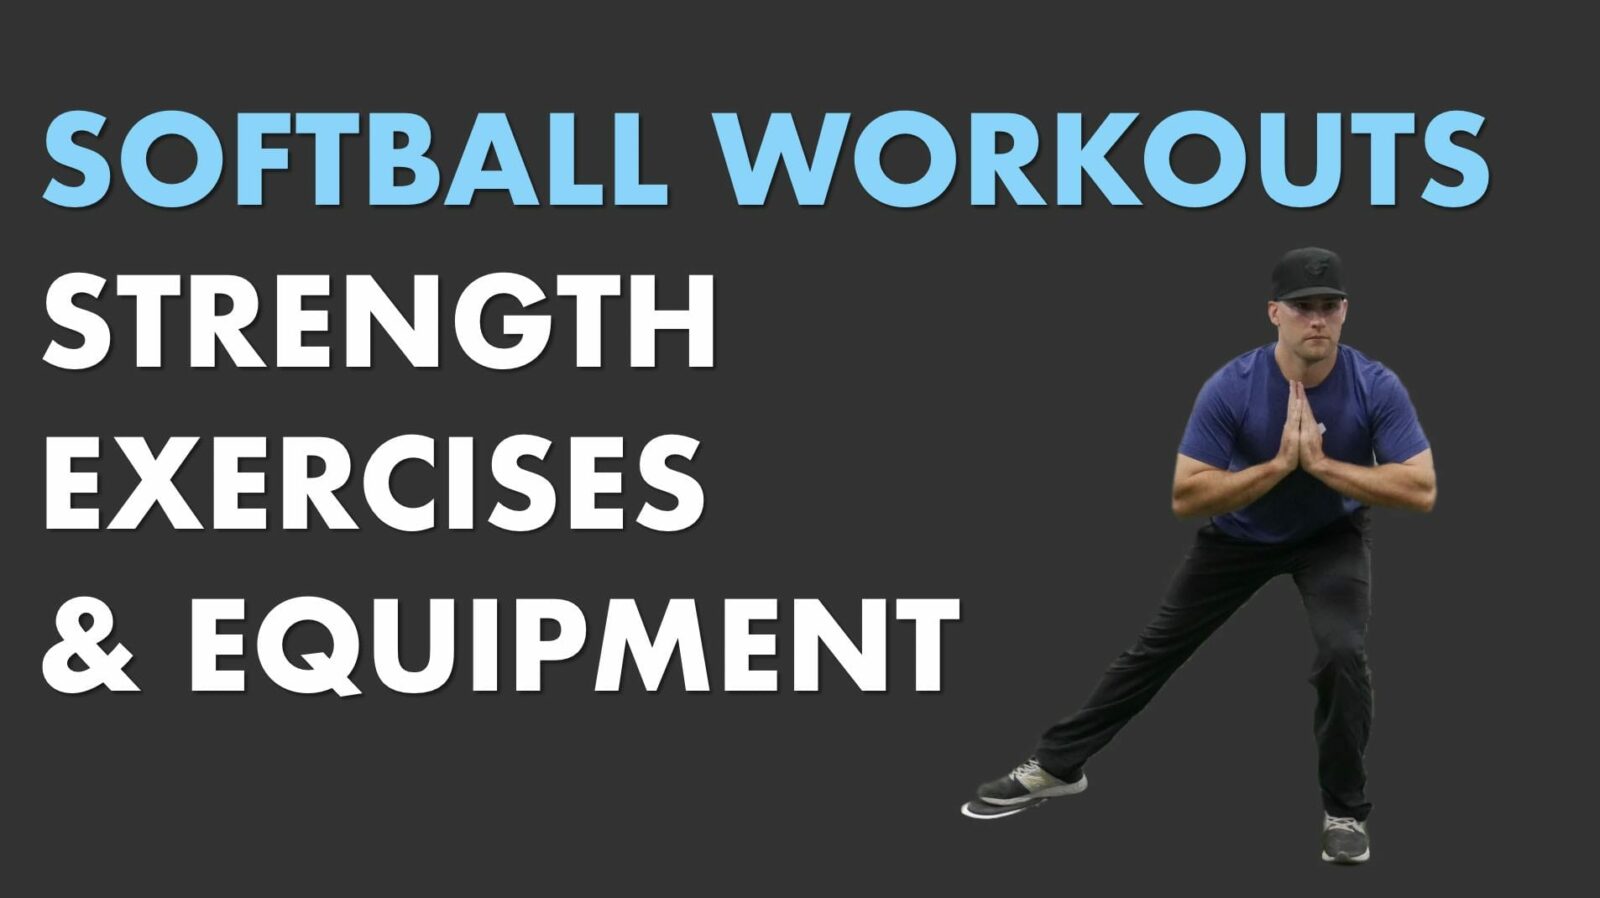 Softball Conditioning  Conditioning workouts, All body workout, Conditioning  training